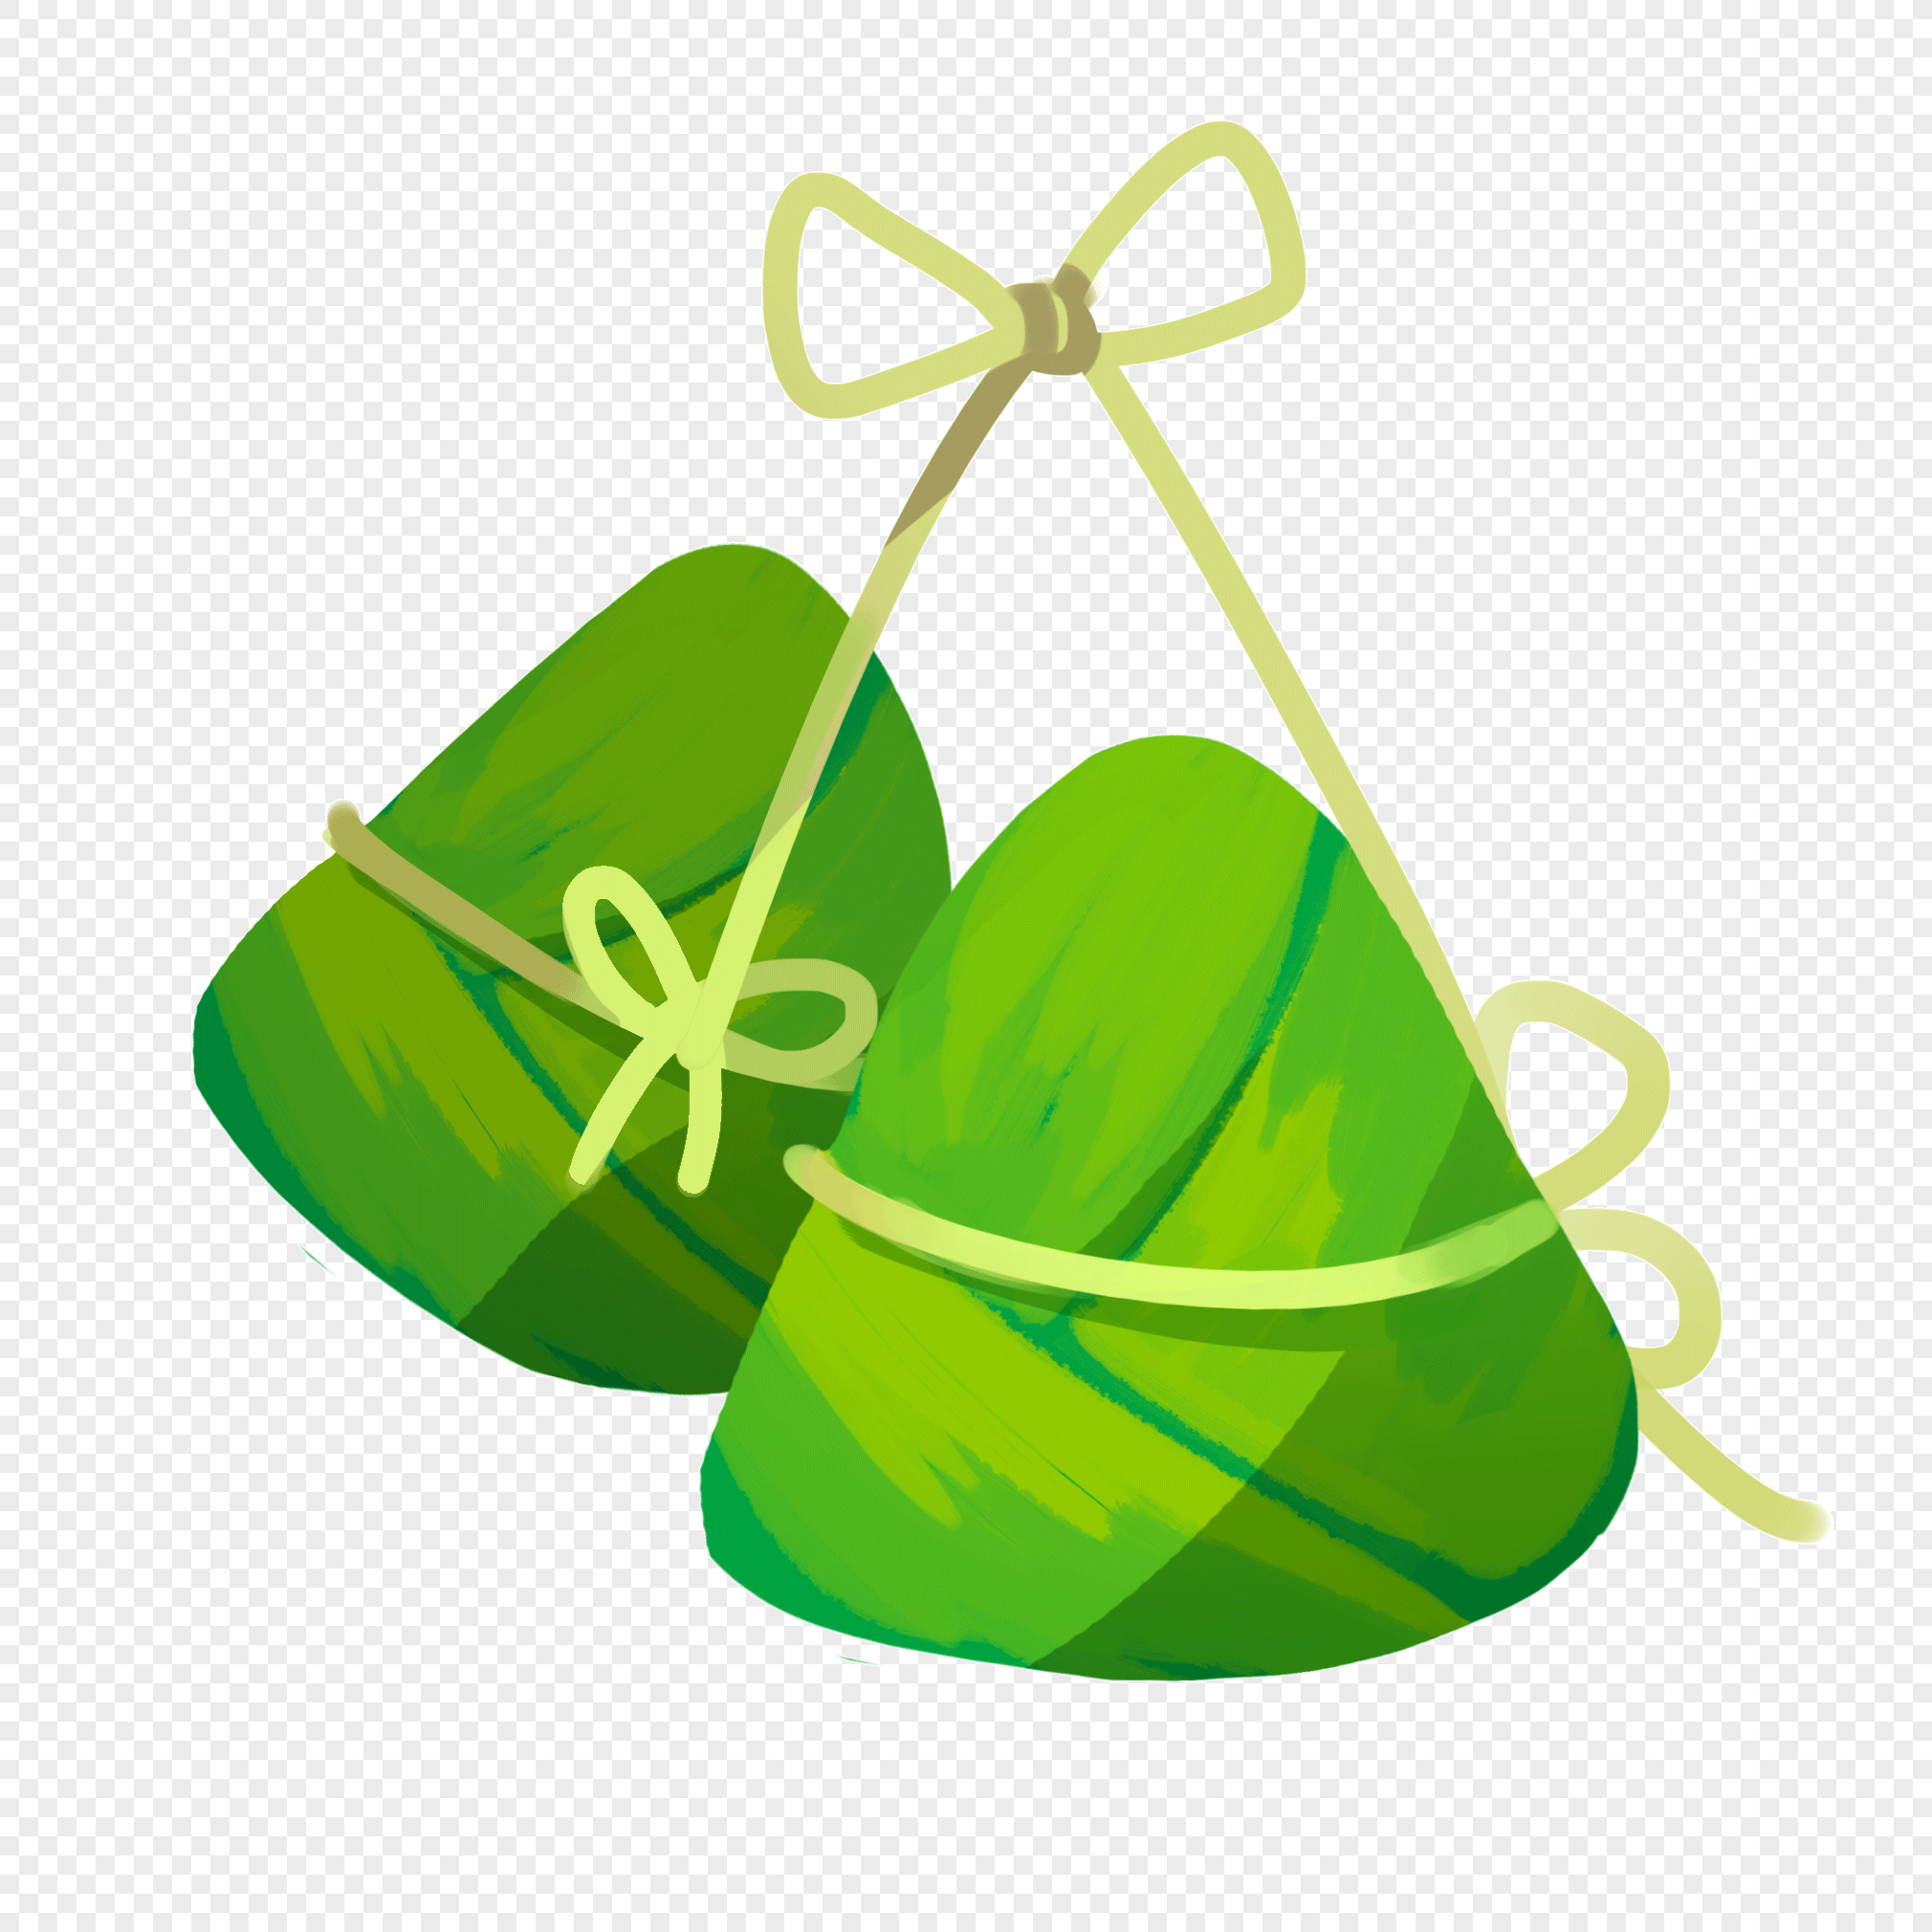 Cartoon Zongzi PNG Transparent Image And Clipart Image For Free ...